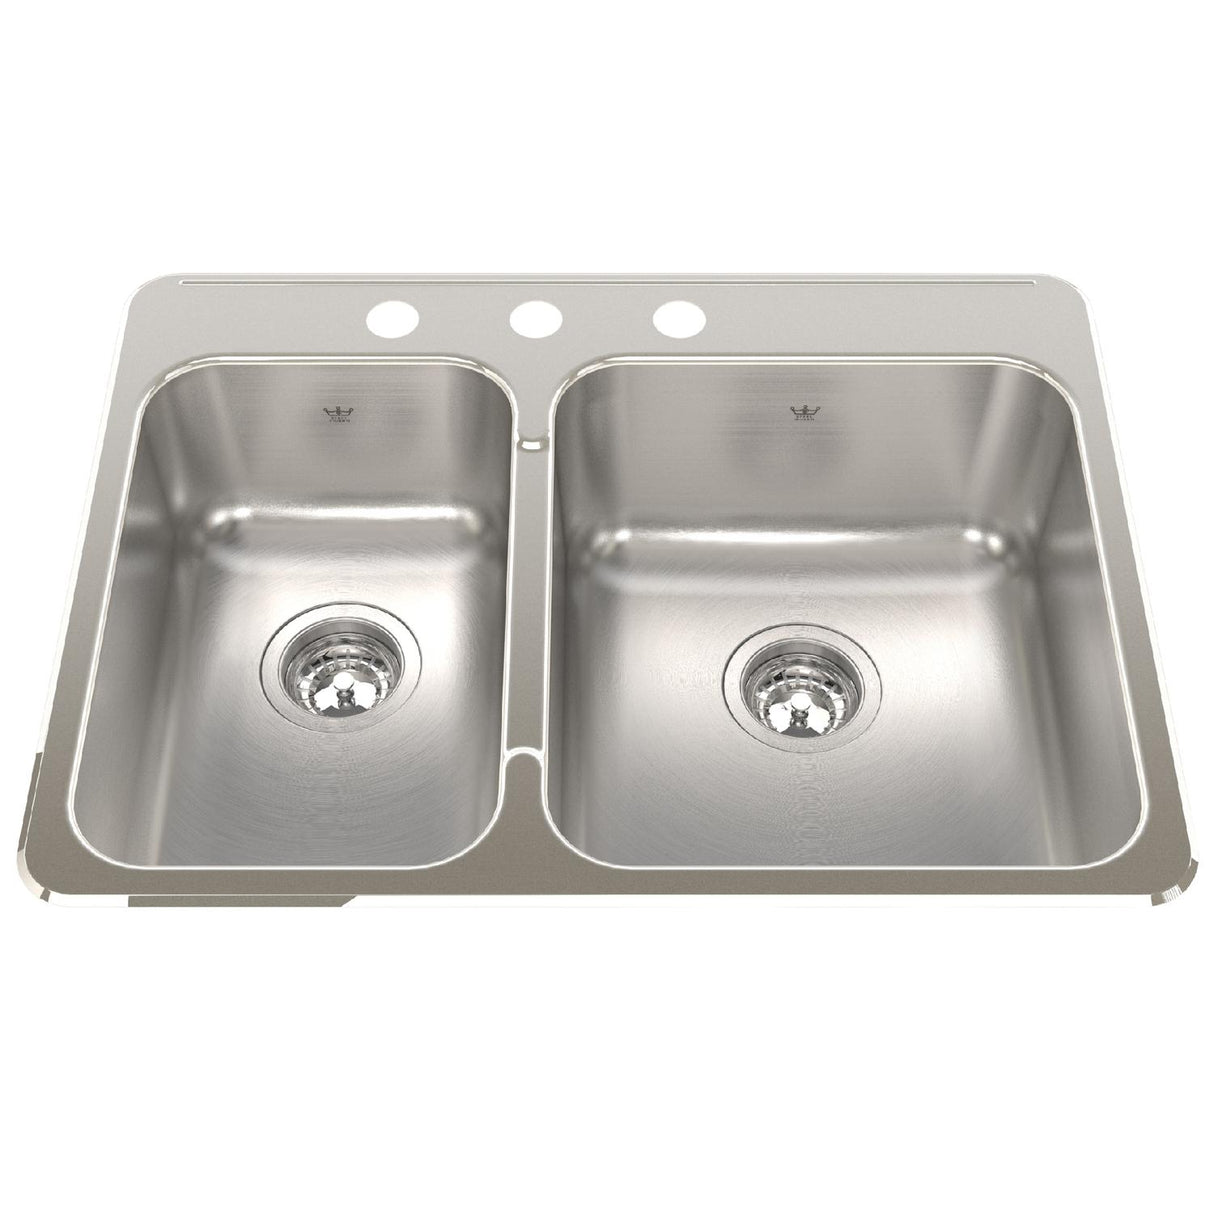 KINDRED QCLA2027L-8-3N Steel Queen 27.25-in LR x 20.56-in FB x 8-in DP Drop In Double Bowl 3-Hole Stainless Steel Kitchen Sink In Satin Finished Bowls with Mirror Finished Rim